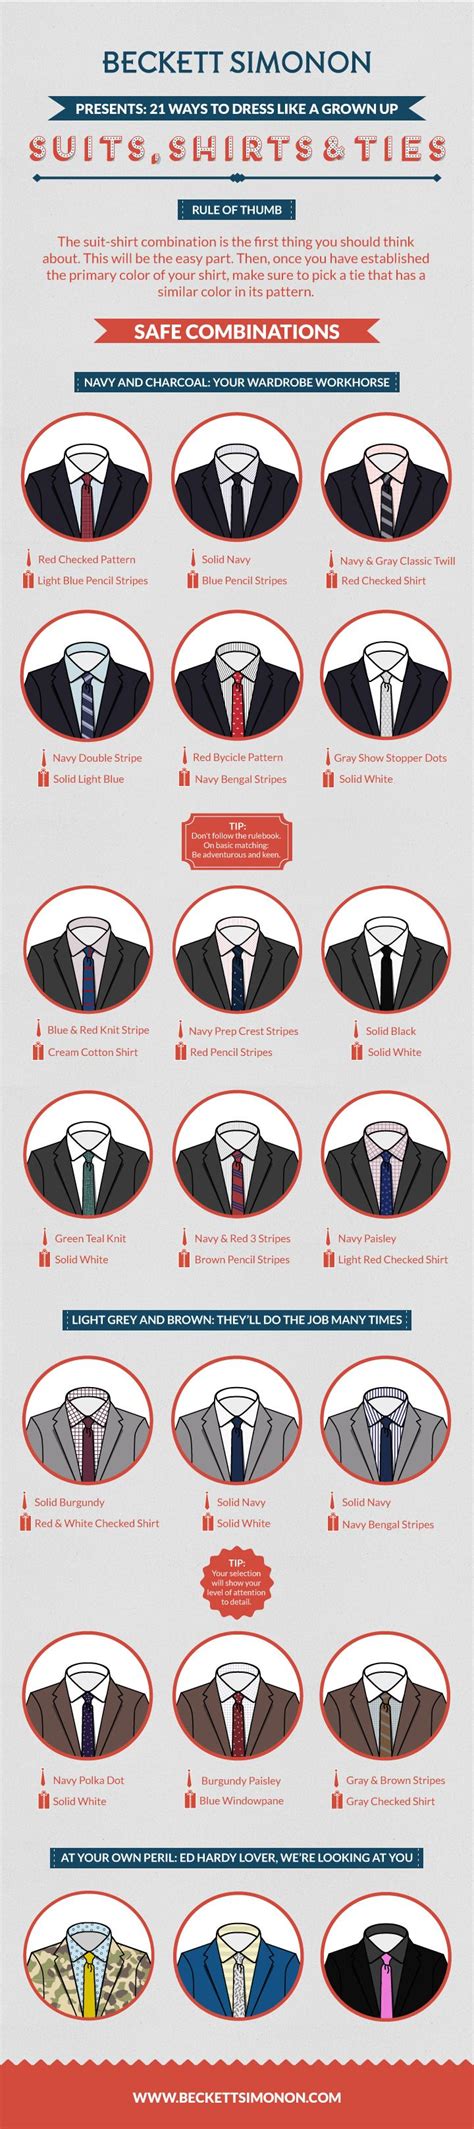 how to match suits shirts and ties like a pro mens fashion well dressed men men style tips